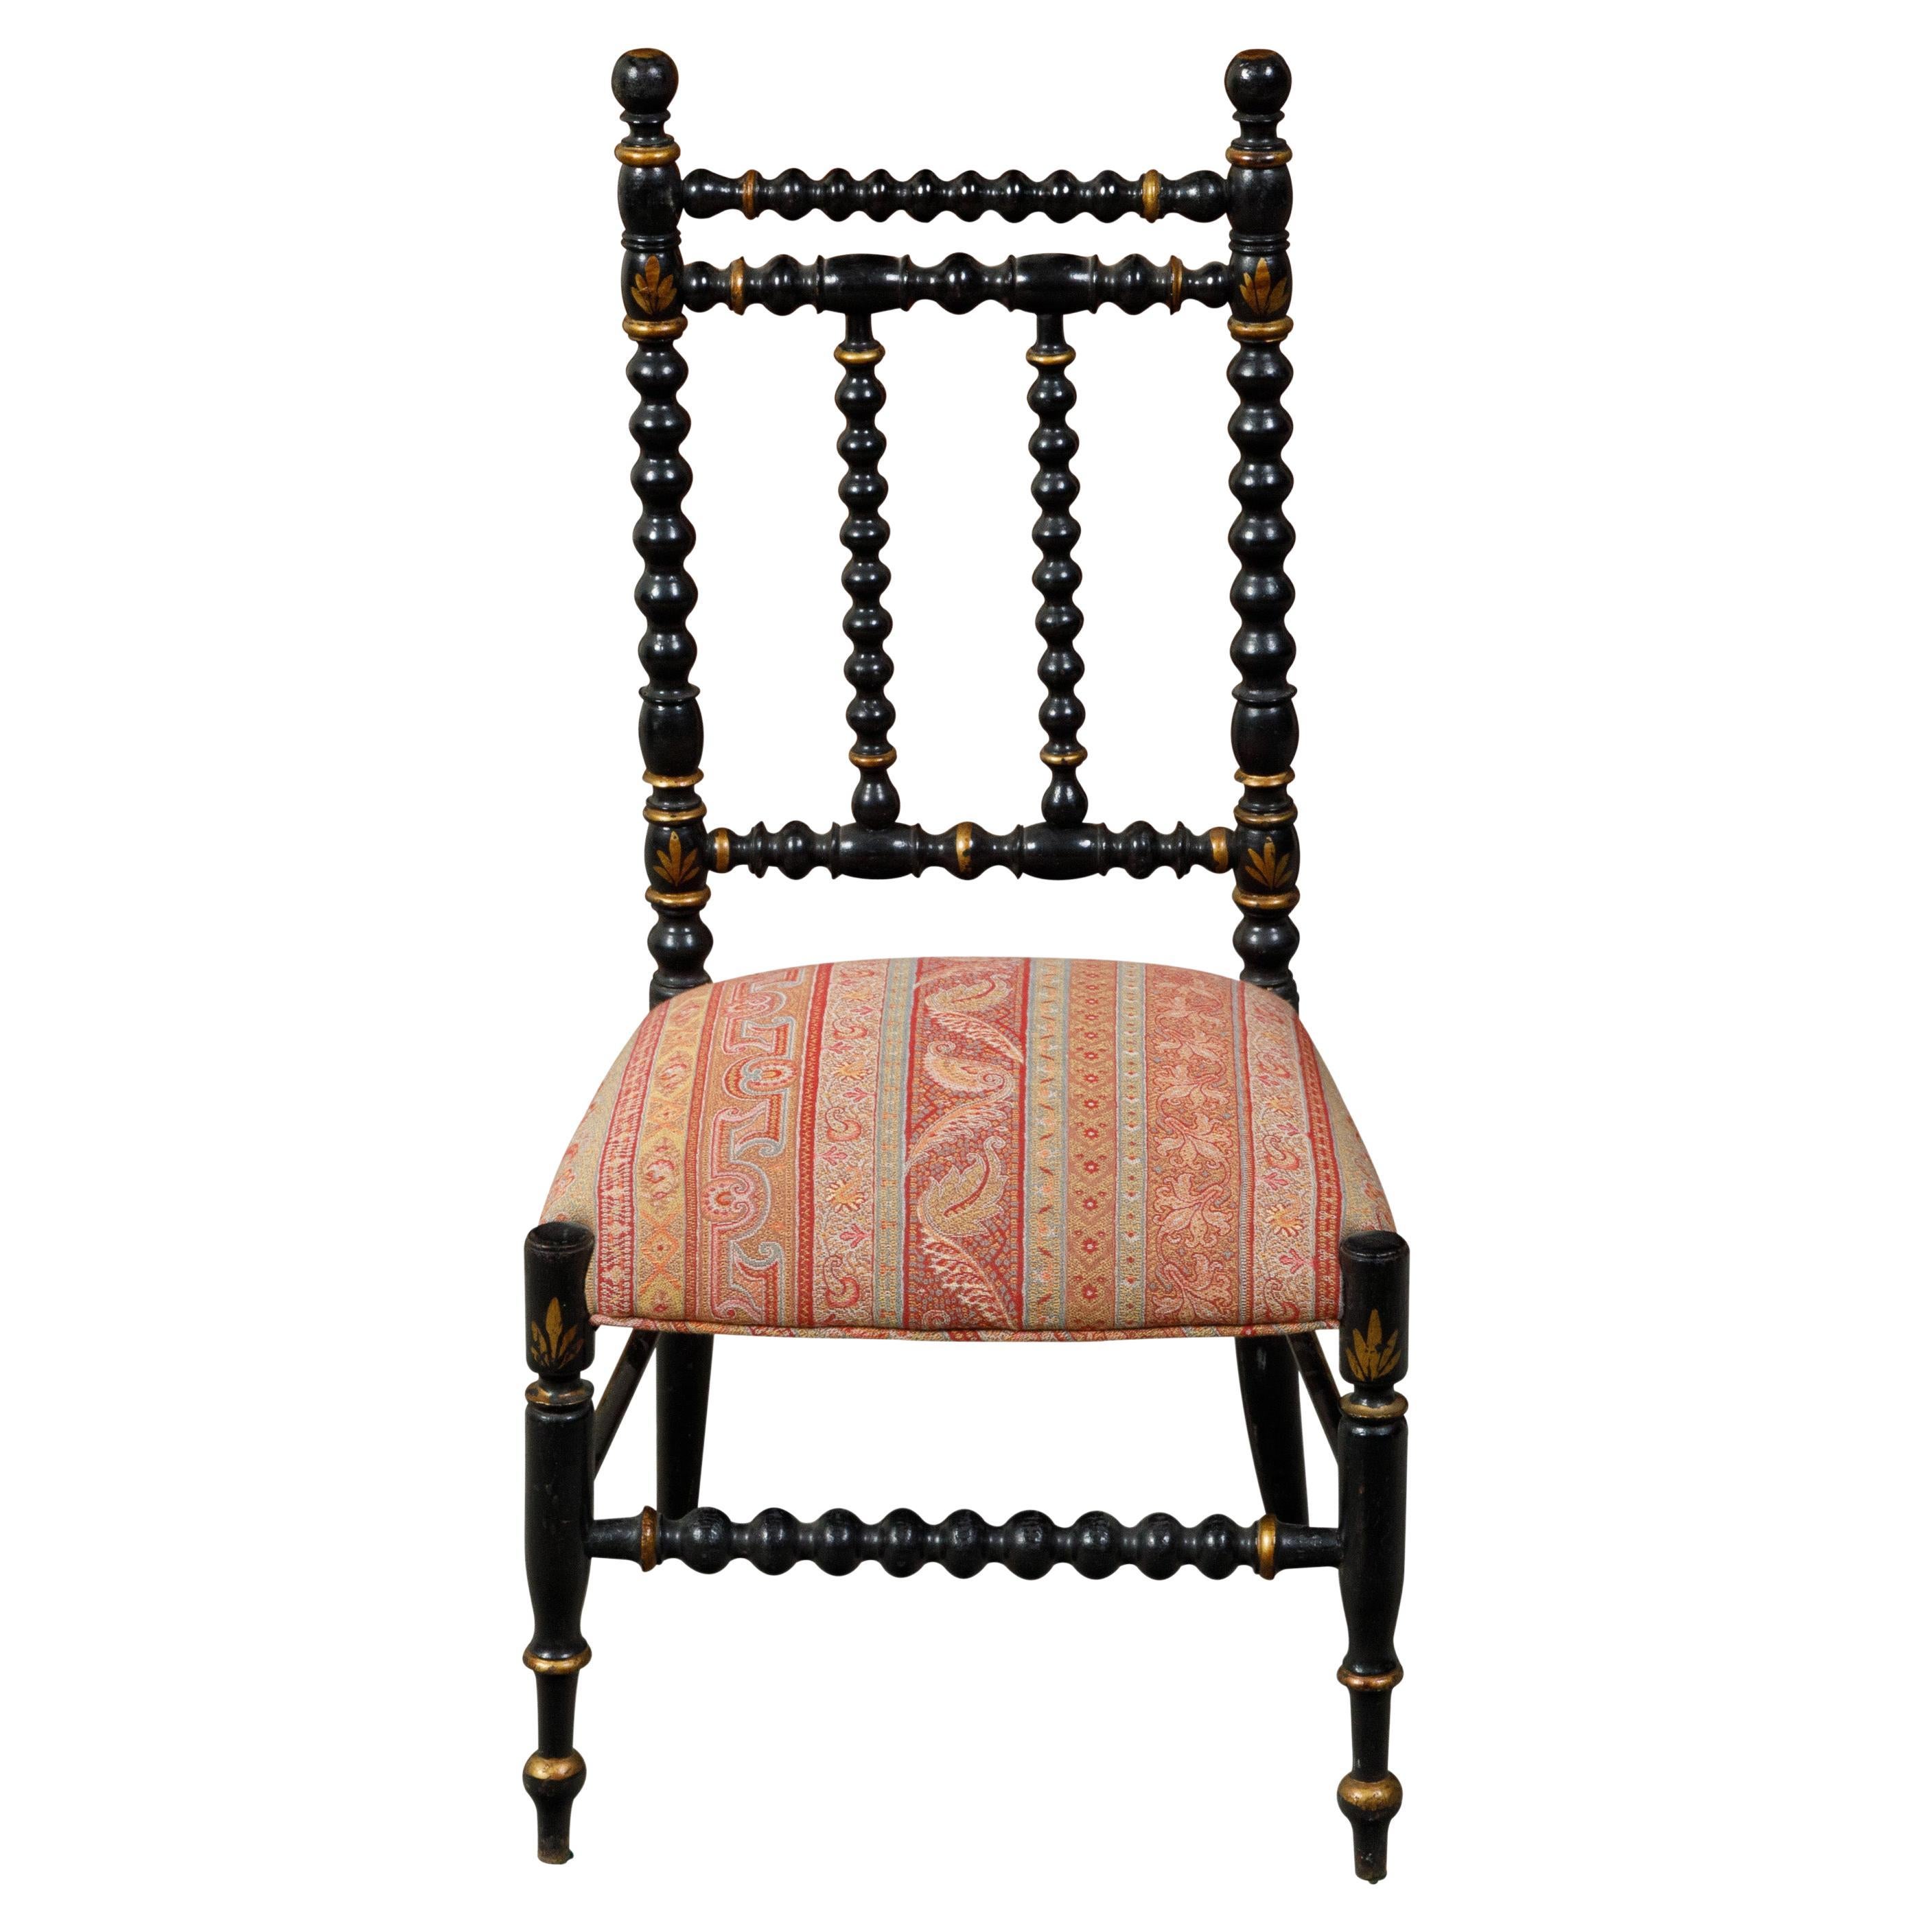 English 19th Century Ebonized Wood Bobbin Child's Chair with Woven Upholstery For Sale